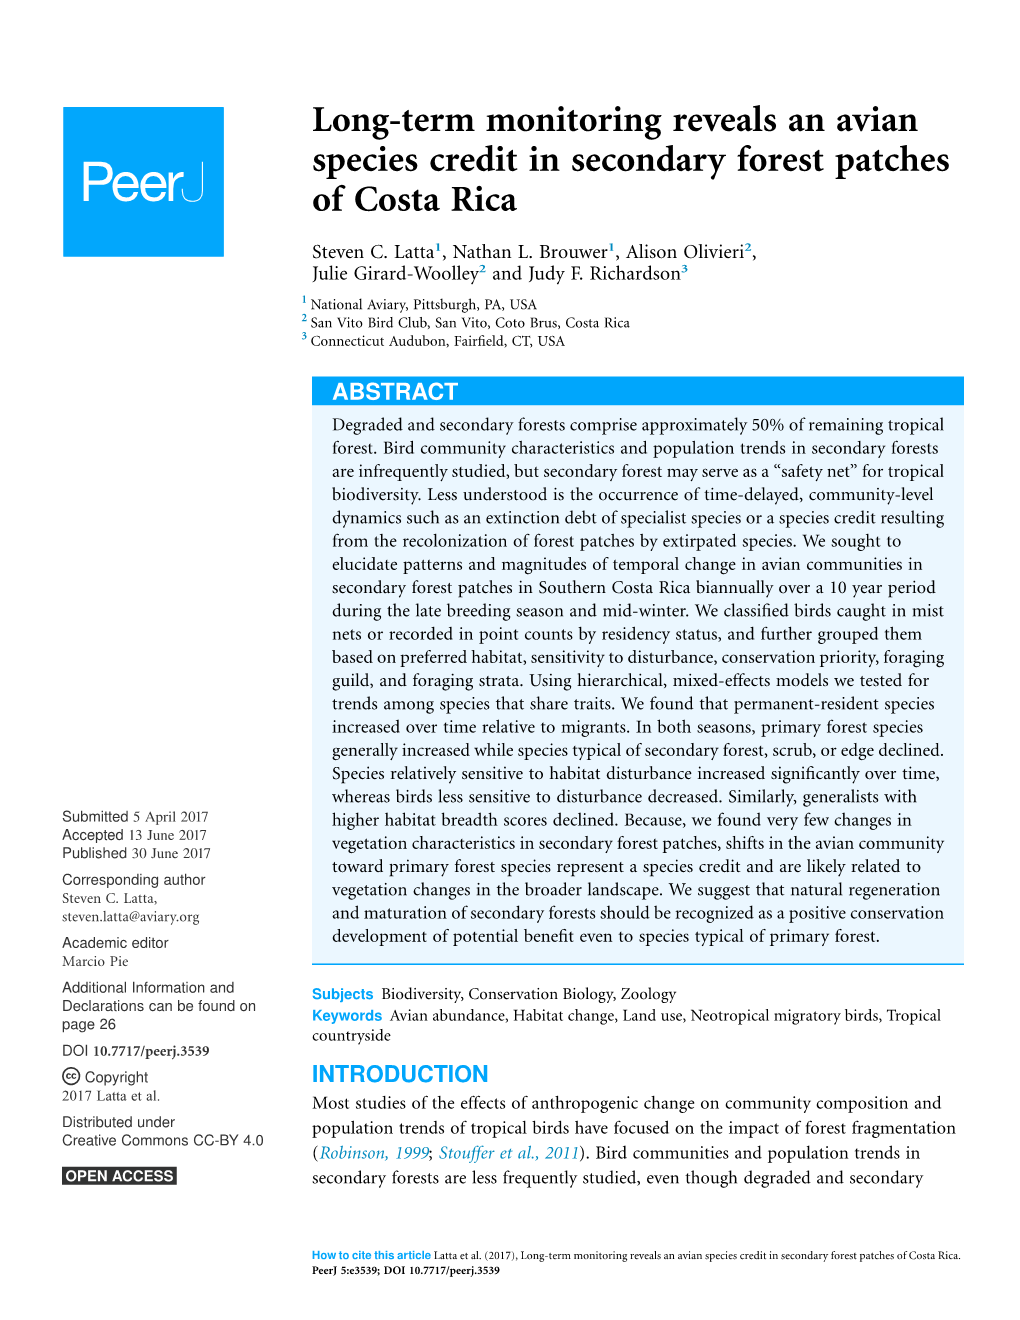 Long-Term Monitoring Reveals an Avian Species Credit in Secondary Forest Patches of Costa Rica